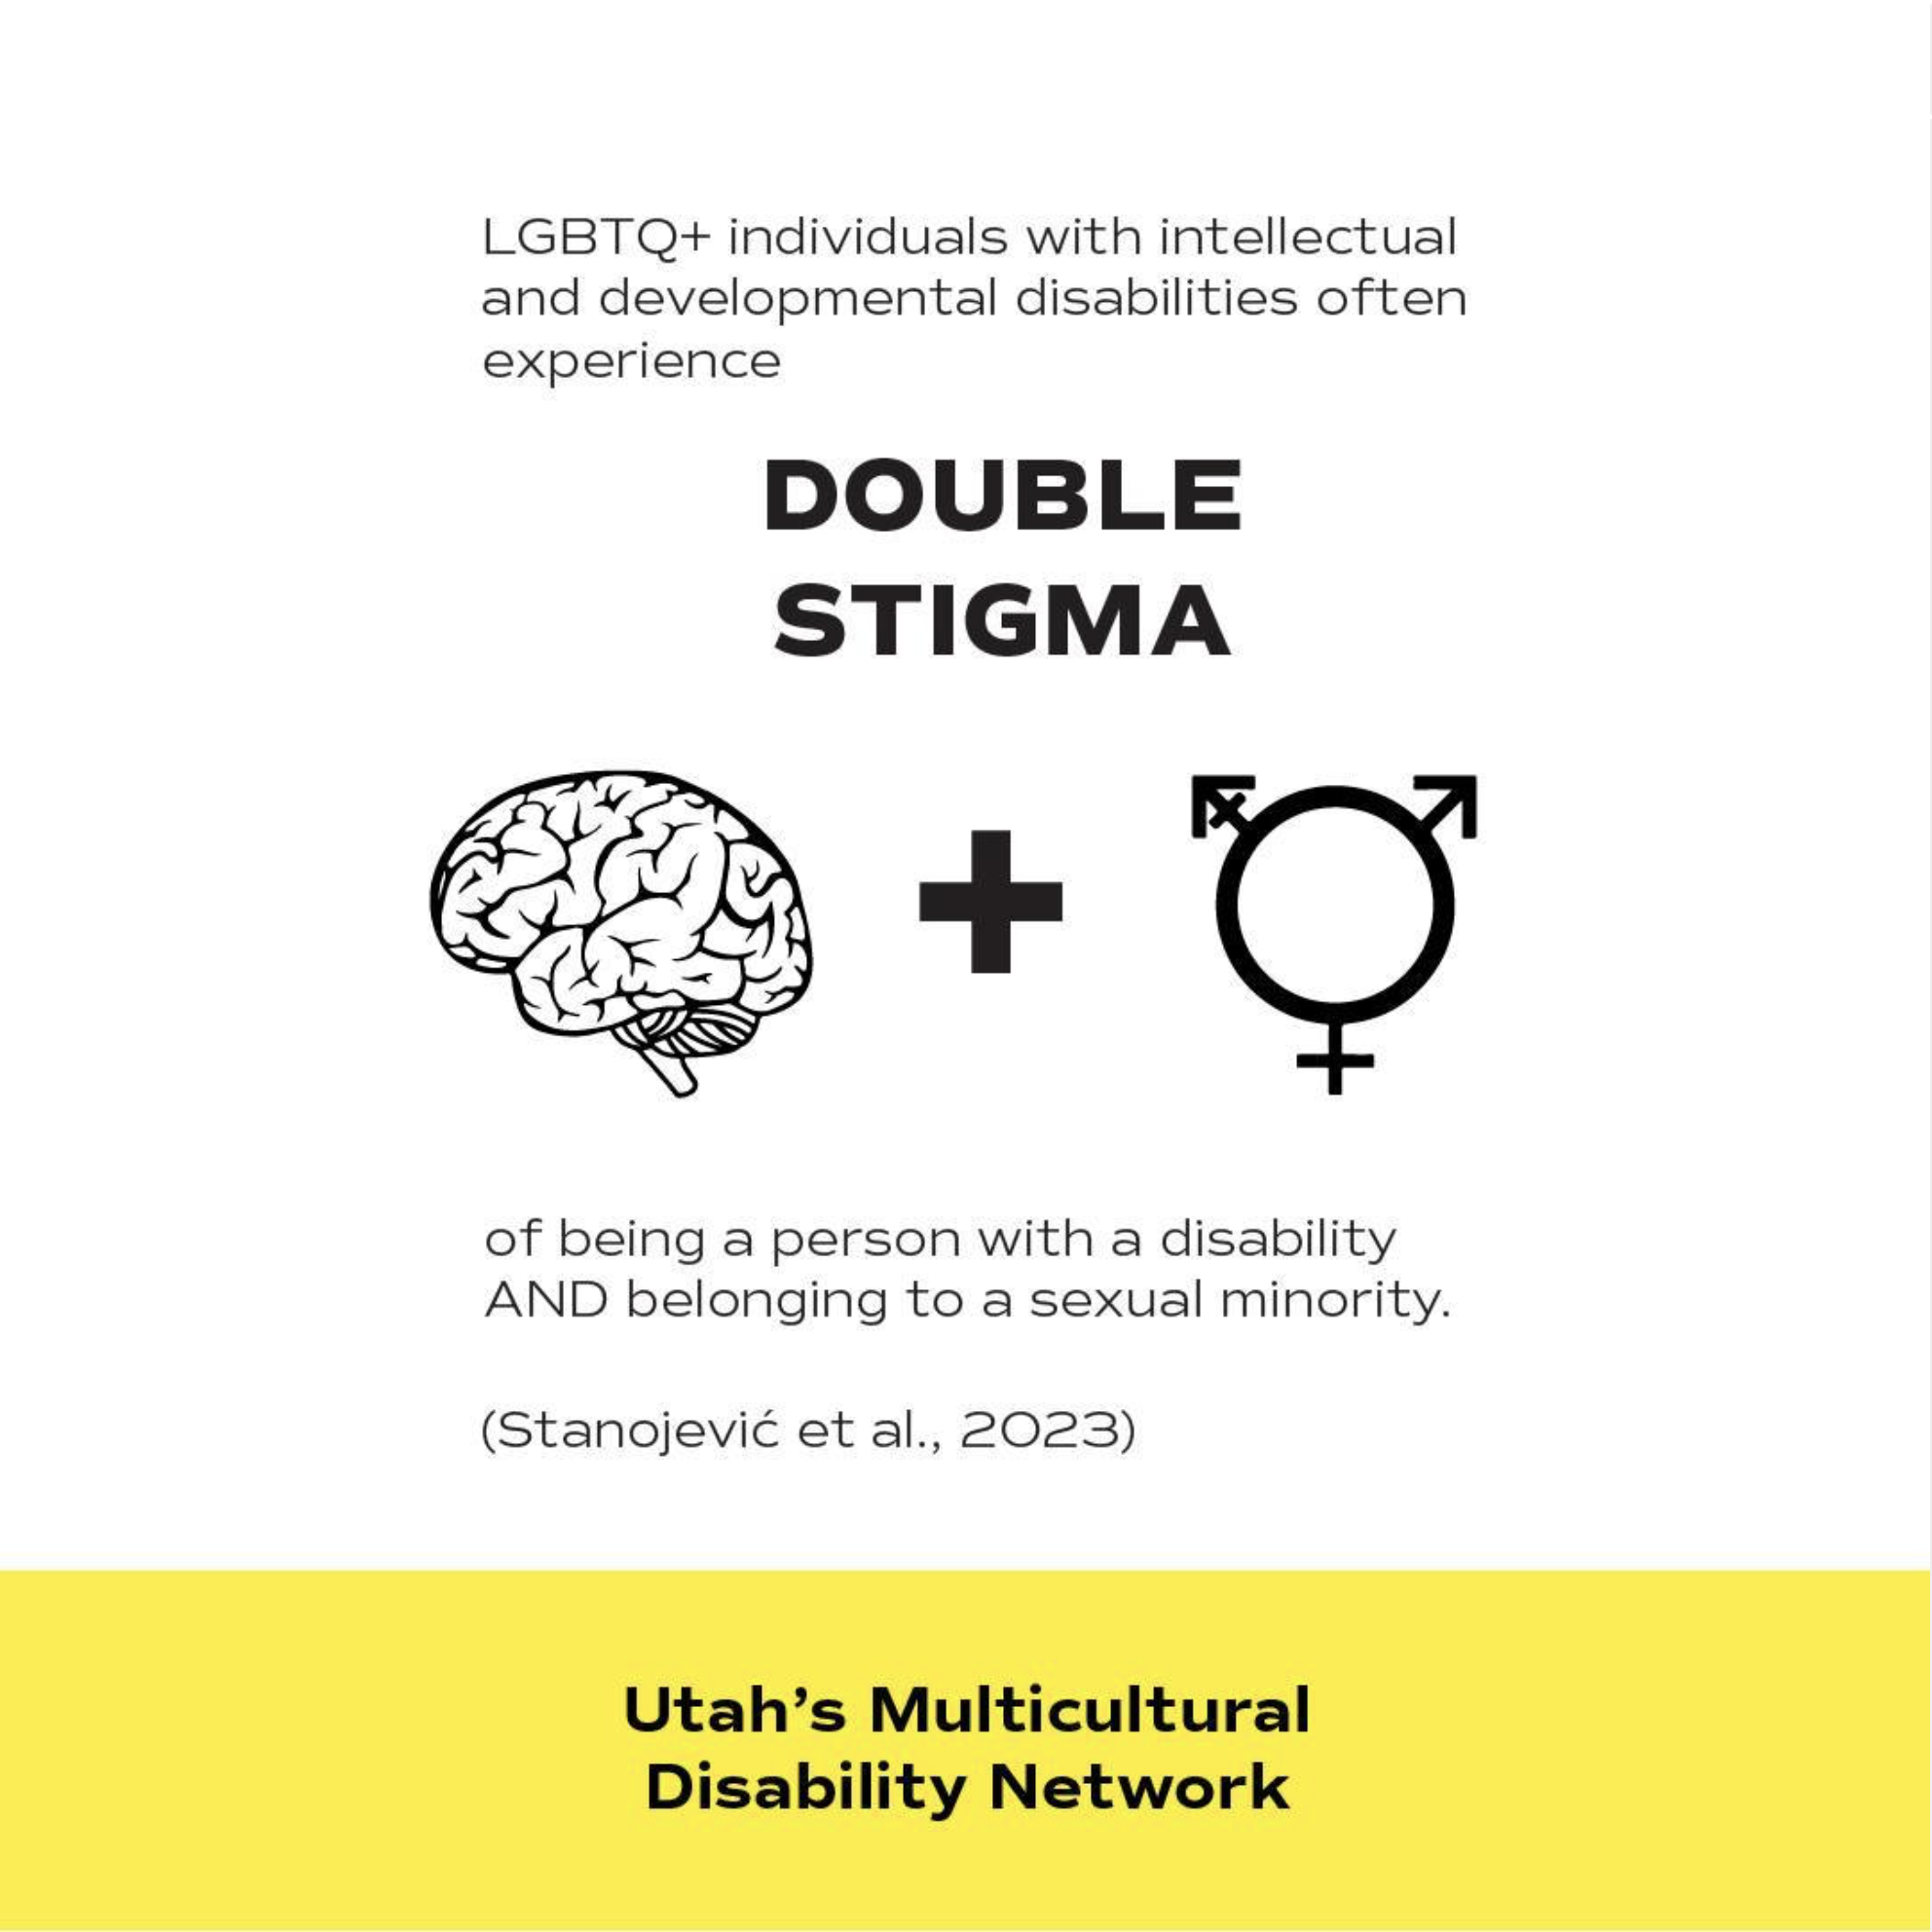 LGBTQ+ individuals with intellectual and developmental disabilities often experience double stigma of being a person with a disability AND belonging to a sexual minority (Stanojevic et al., 2023).